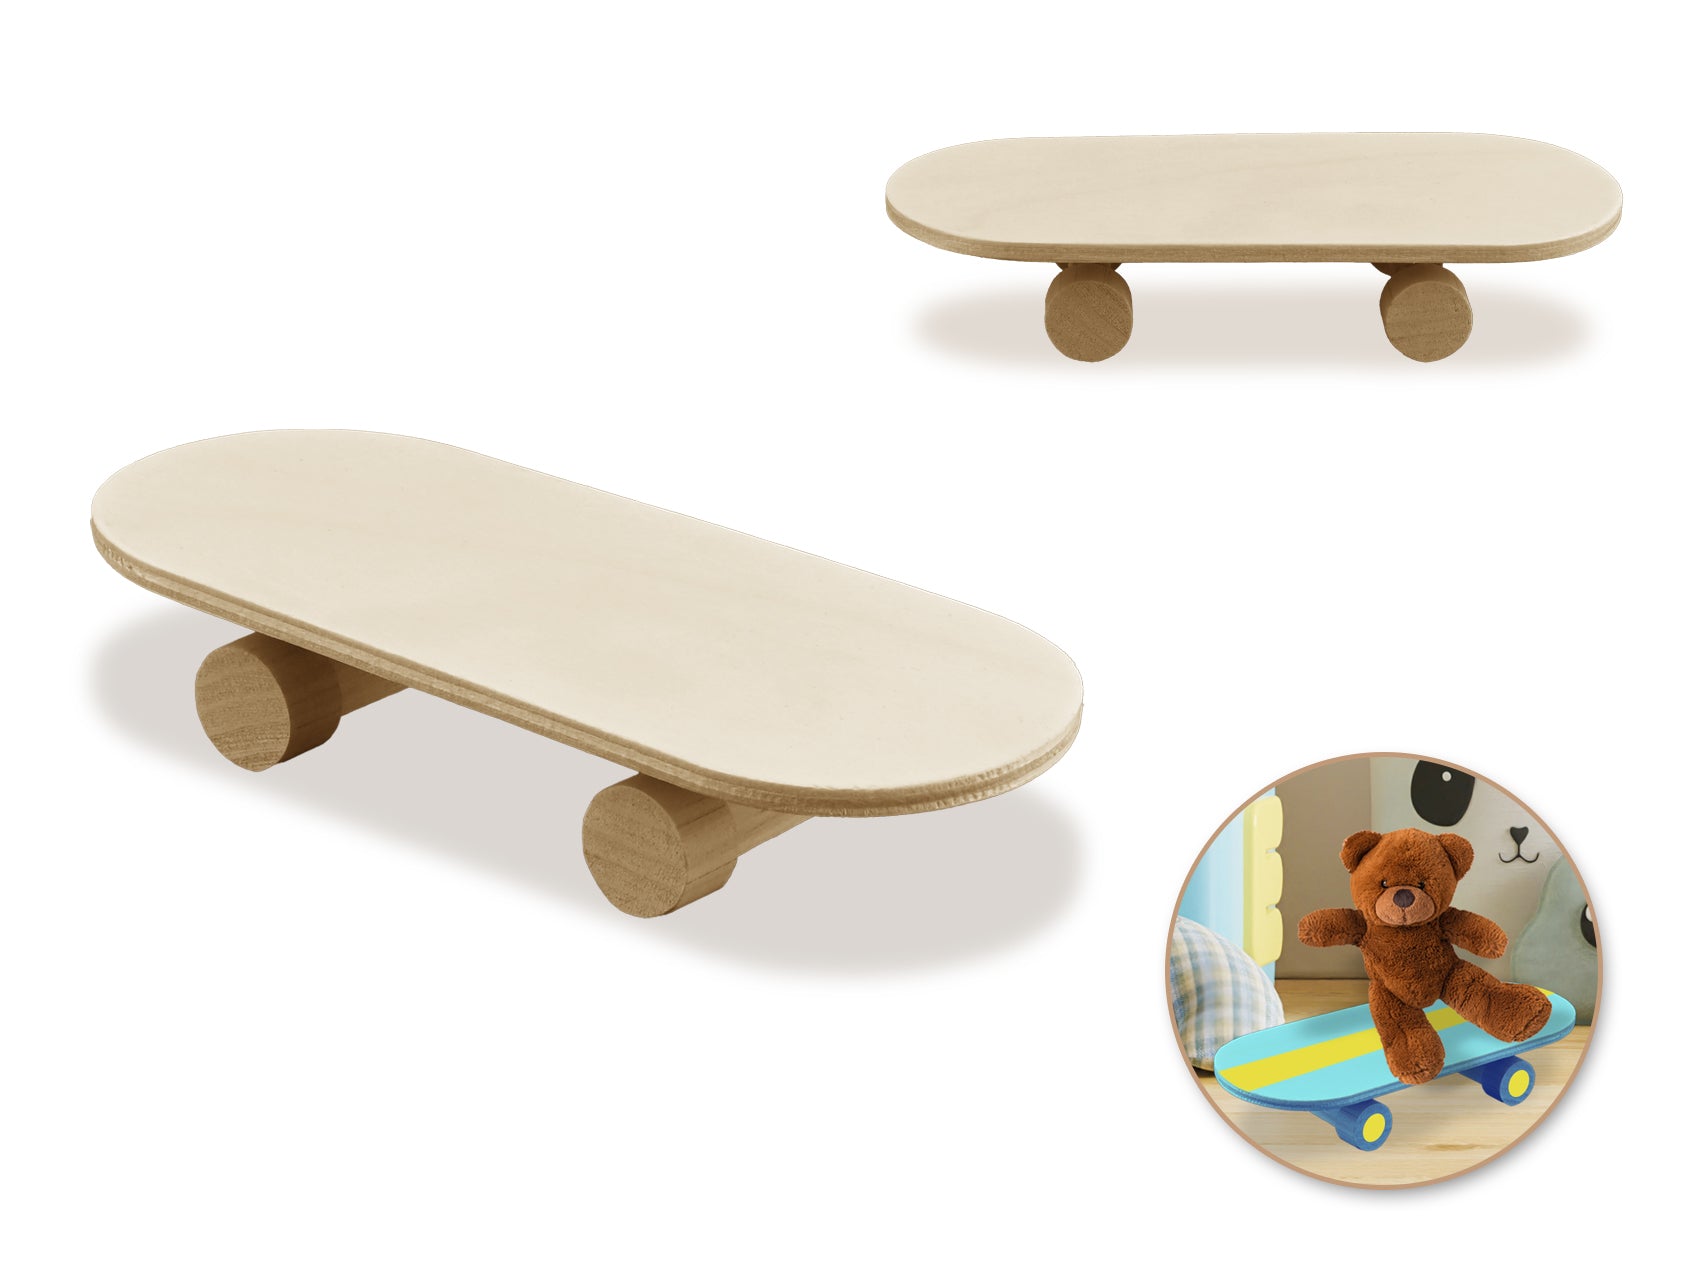 Wooden Craft Skateboard with Functional Wheels, Dimensions 6"x2.5"x1"